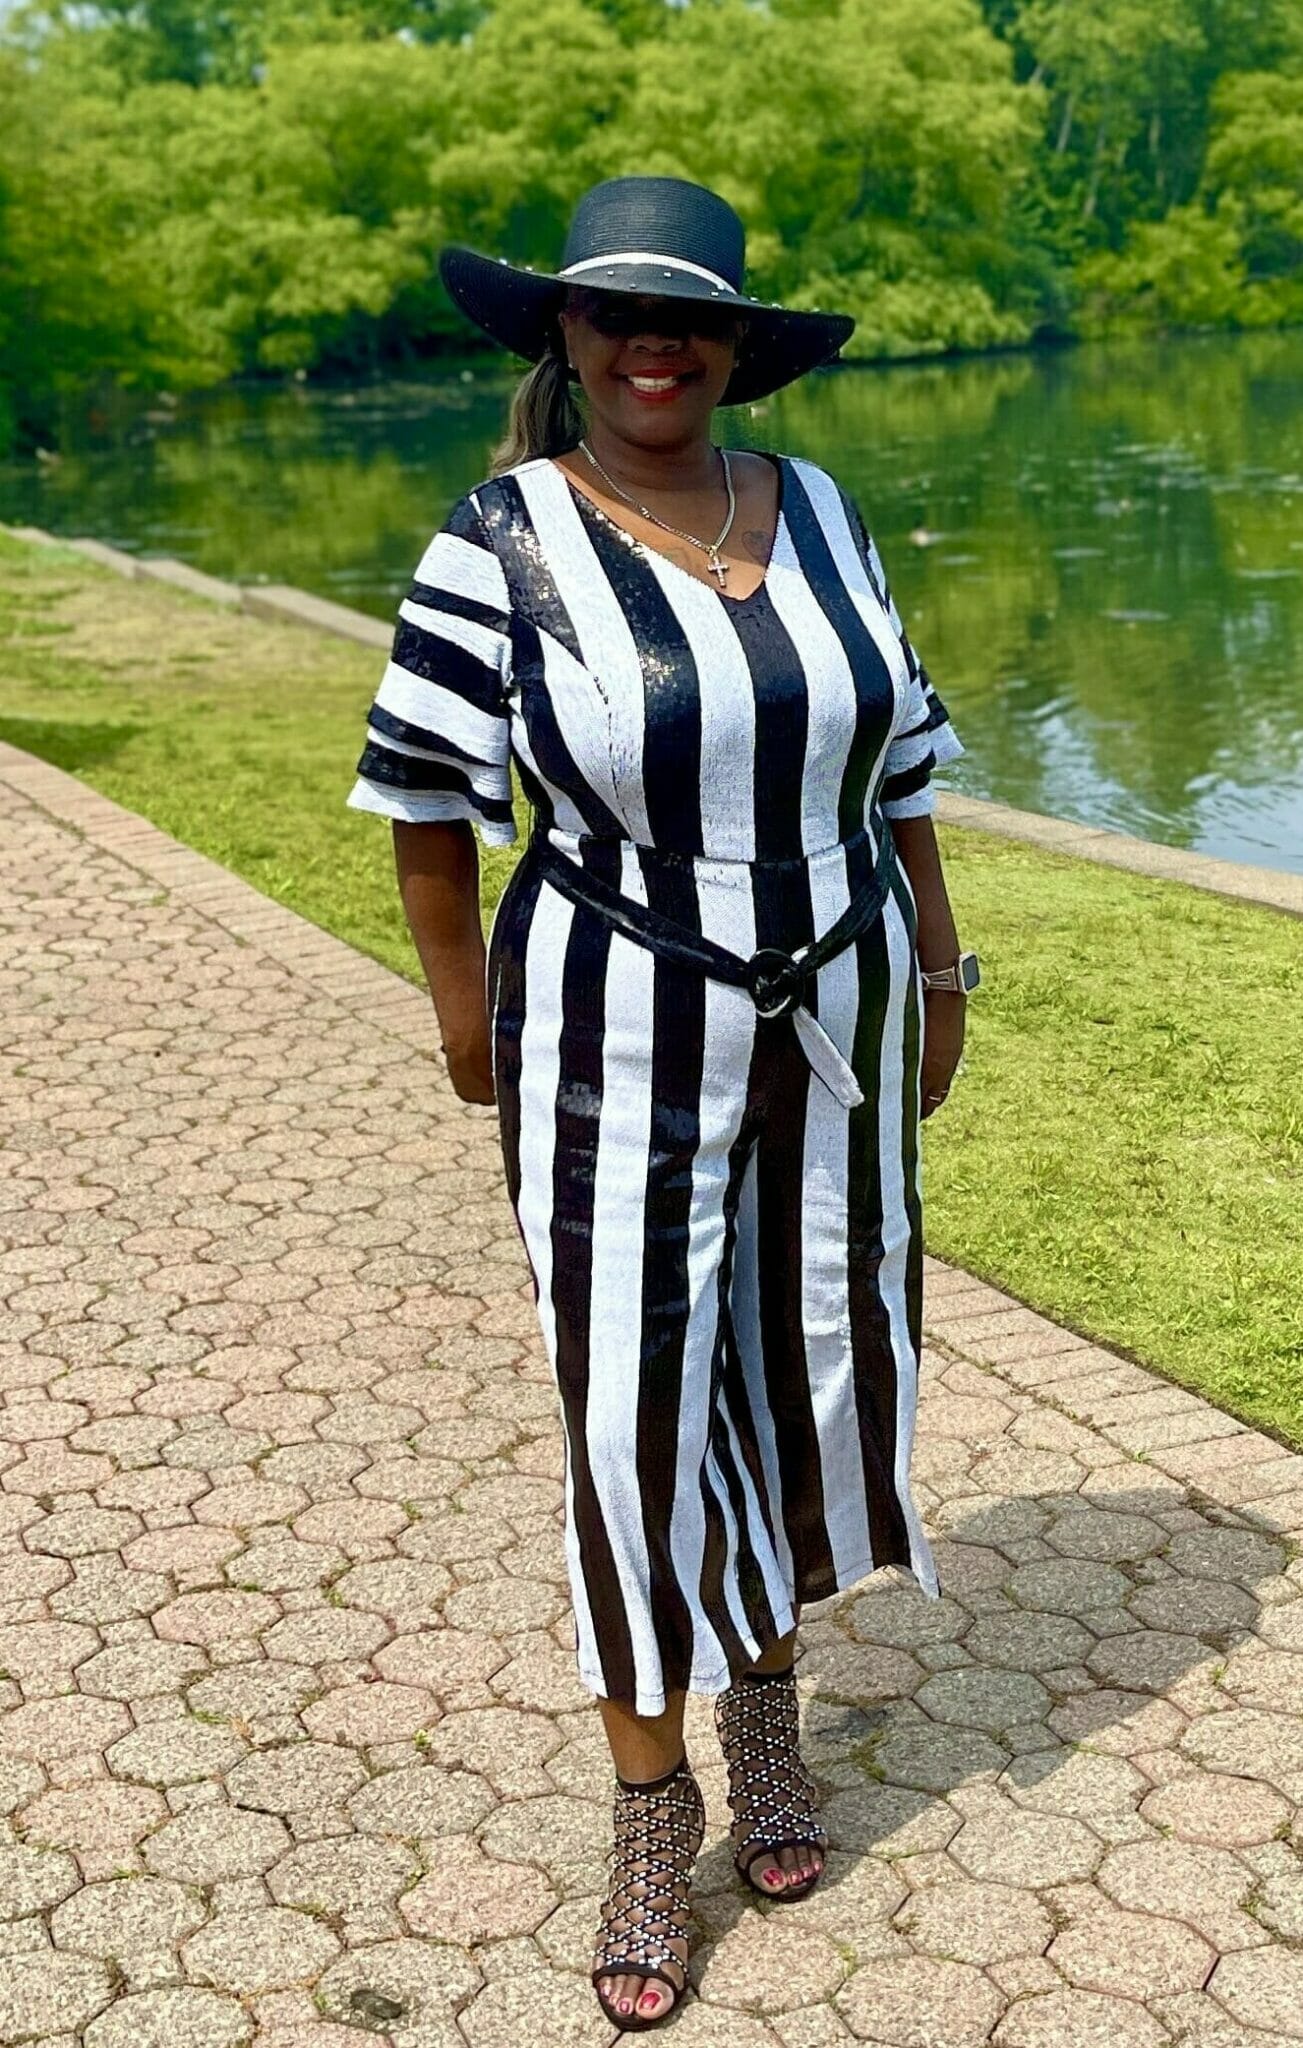 Black woman wearing black and white striped dress with black hat.